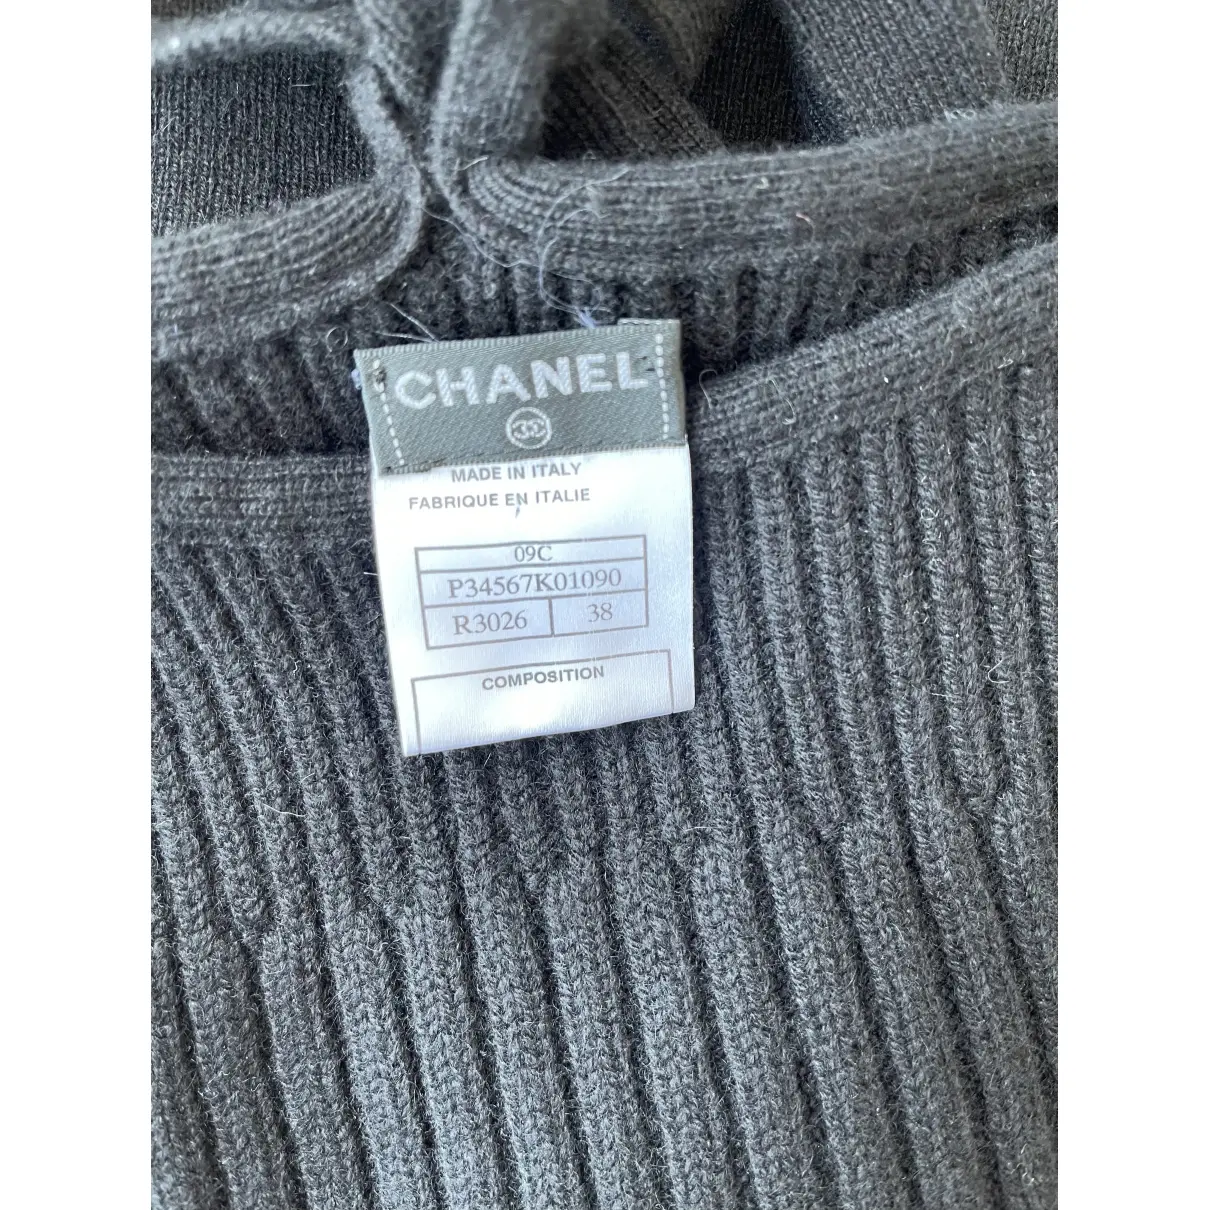 Cashmere mid-length dress Chanel